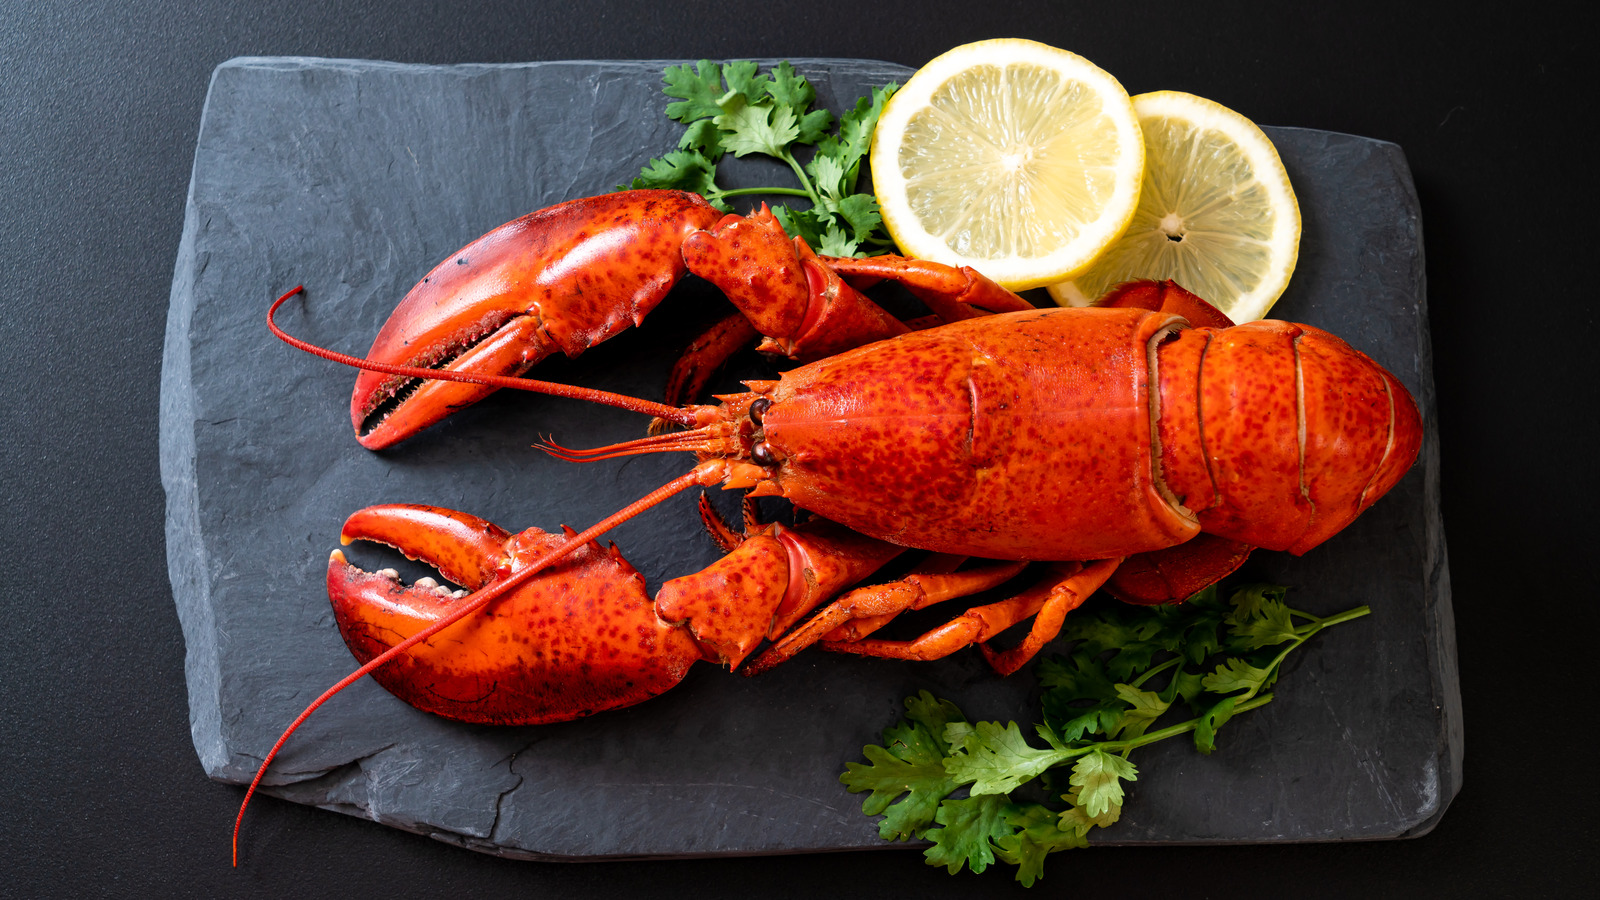 Red Lobster Is Hosting A Free Endless Lobster Party In NYC. Here's How